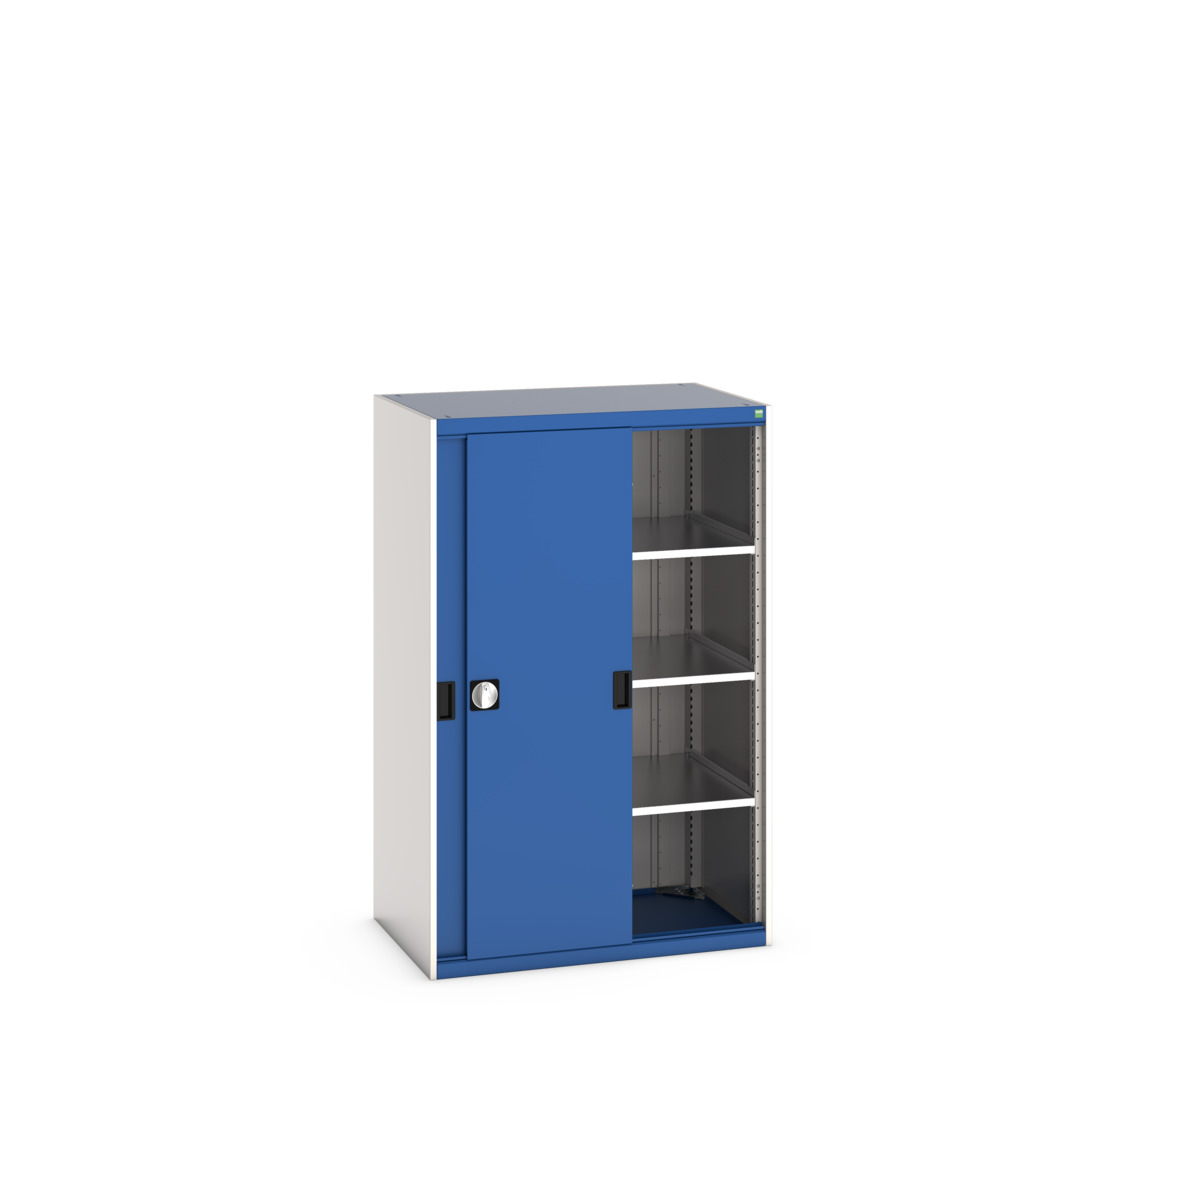 40021214.11V - Armoire Cubio SMS-10616-1